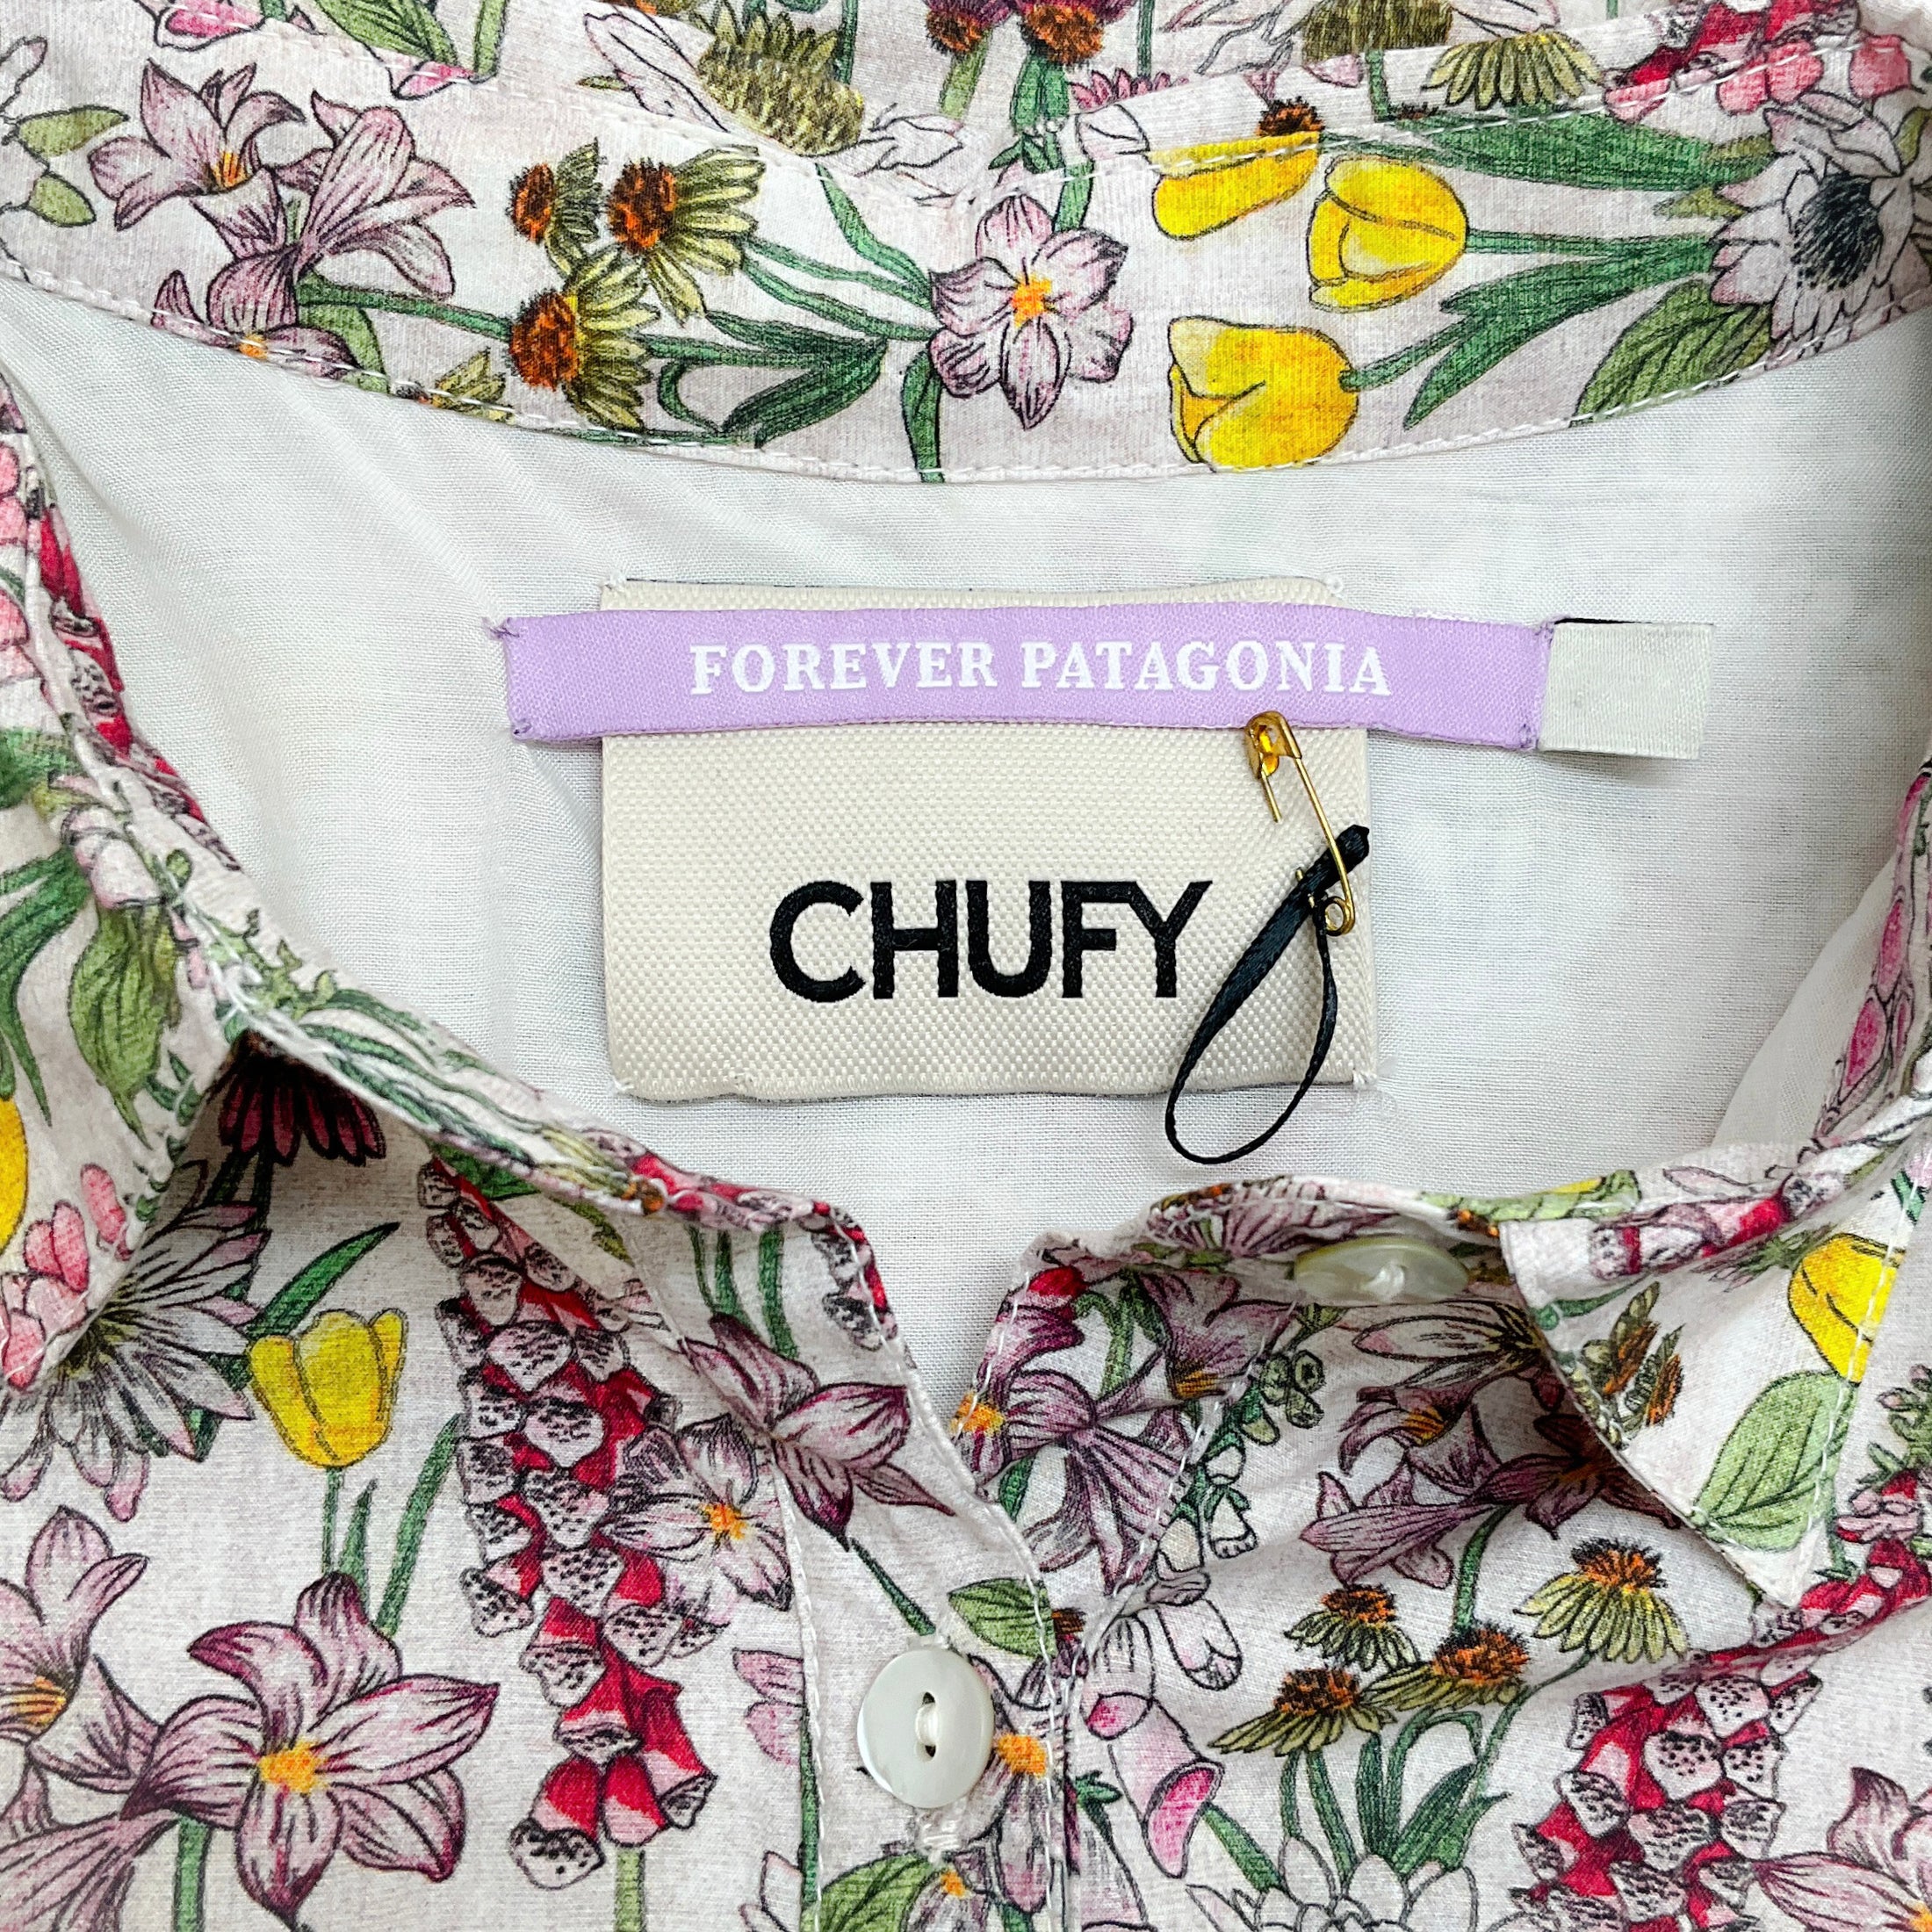 Chufy Pink Multi Floral Button Front Dress